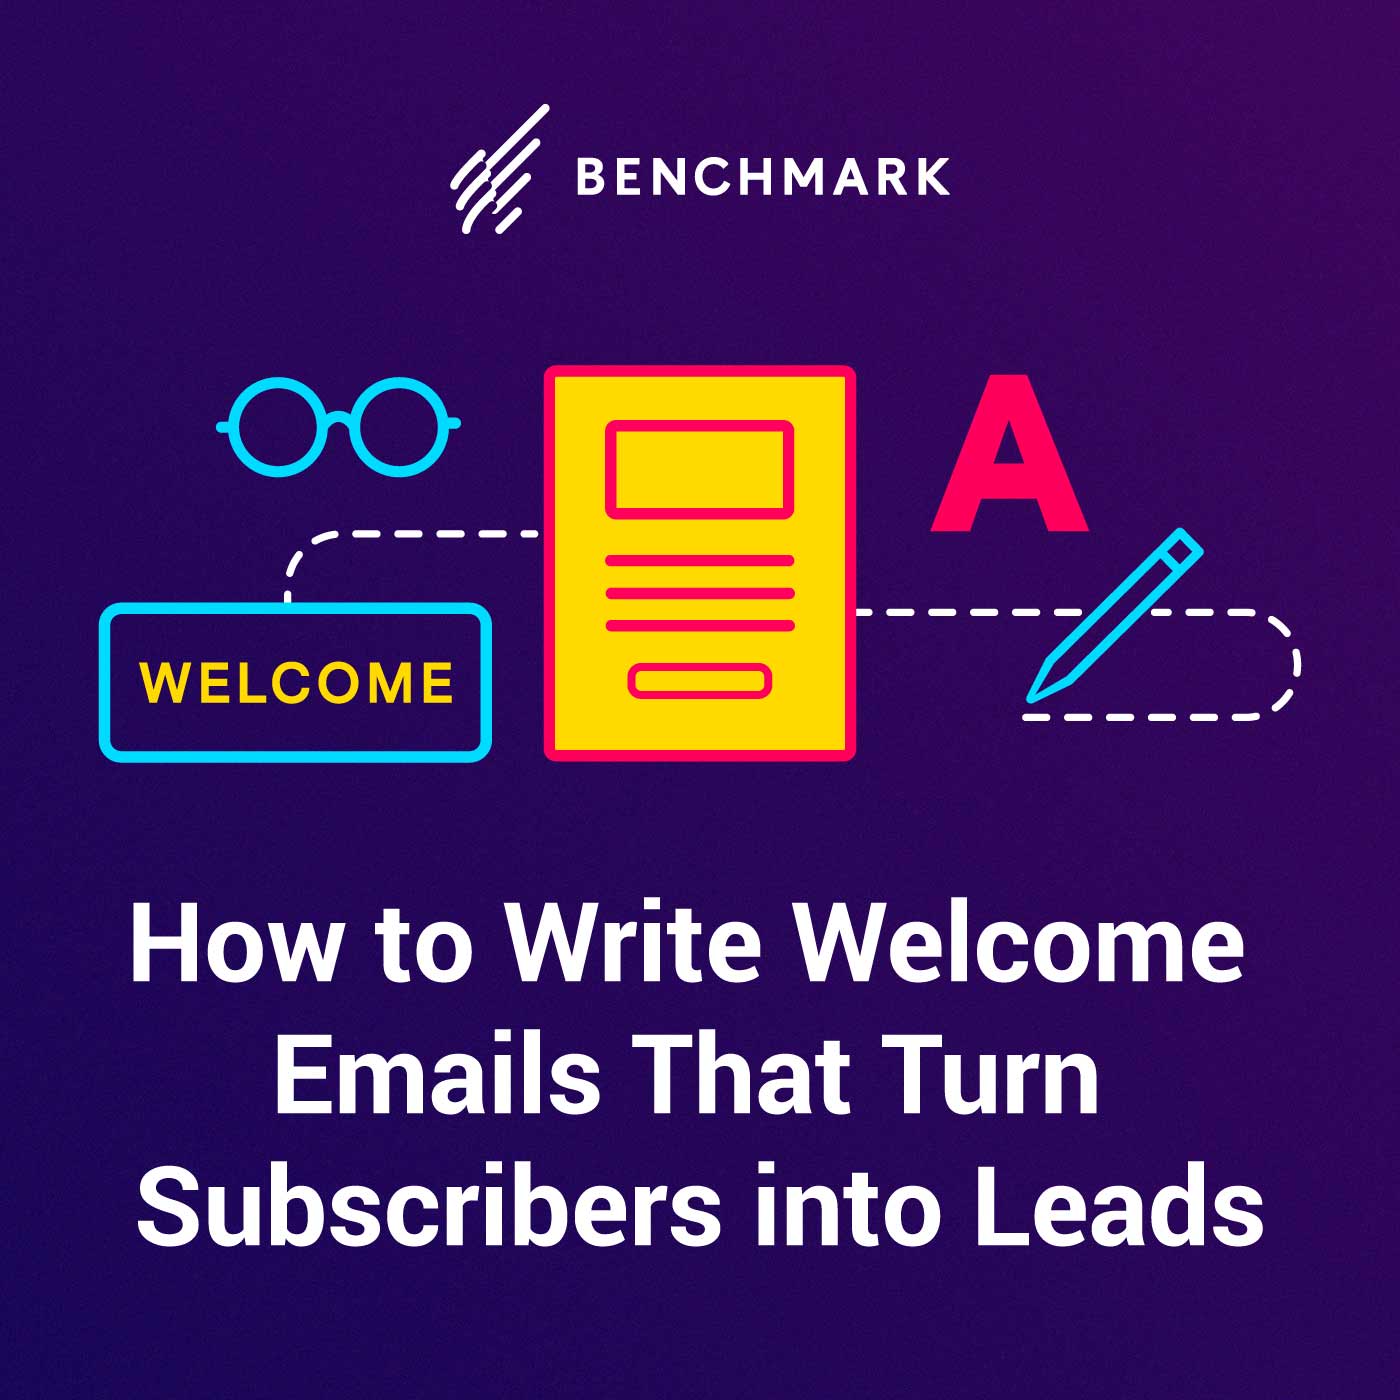 How to Write Welcome Emails That Turn Subscribers into Leads